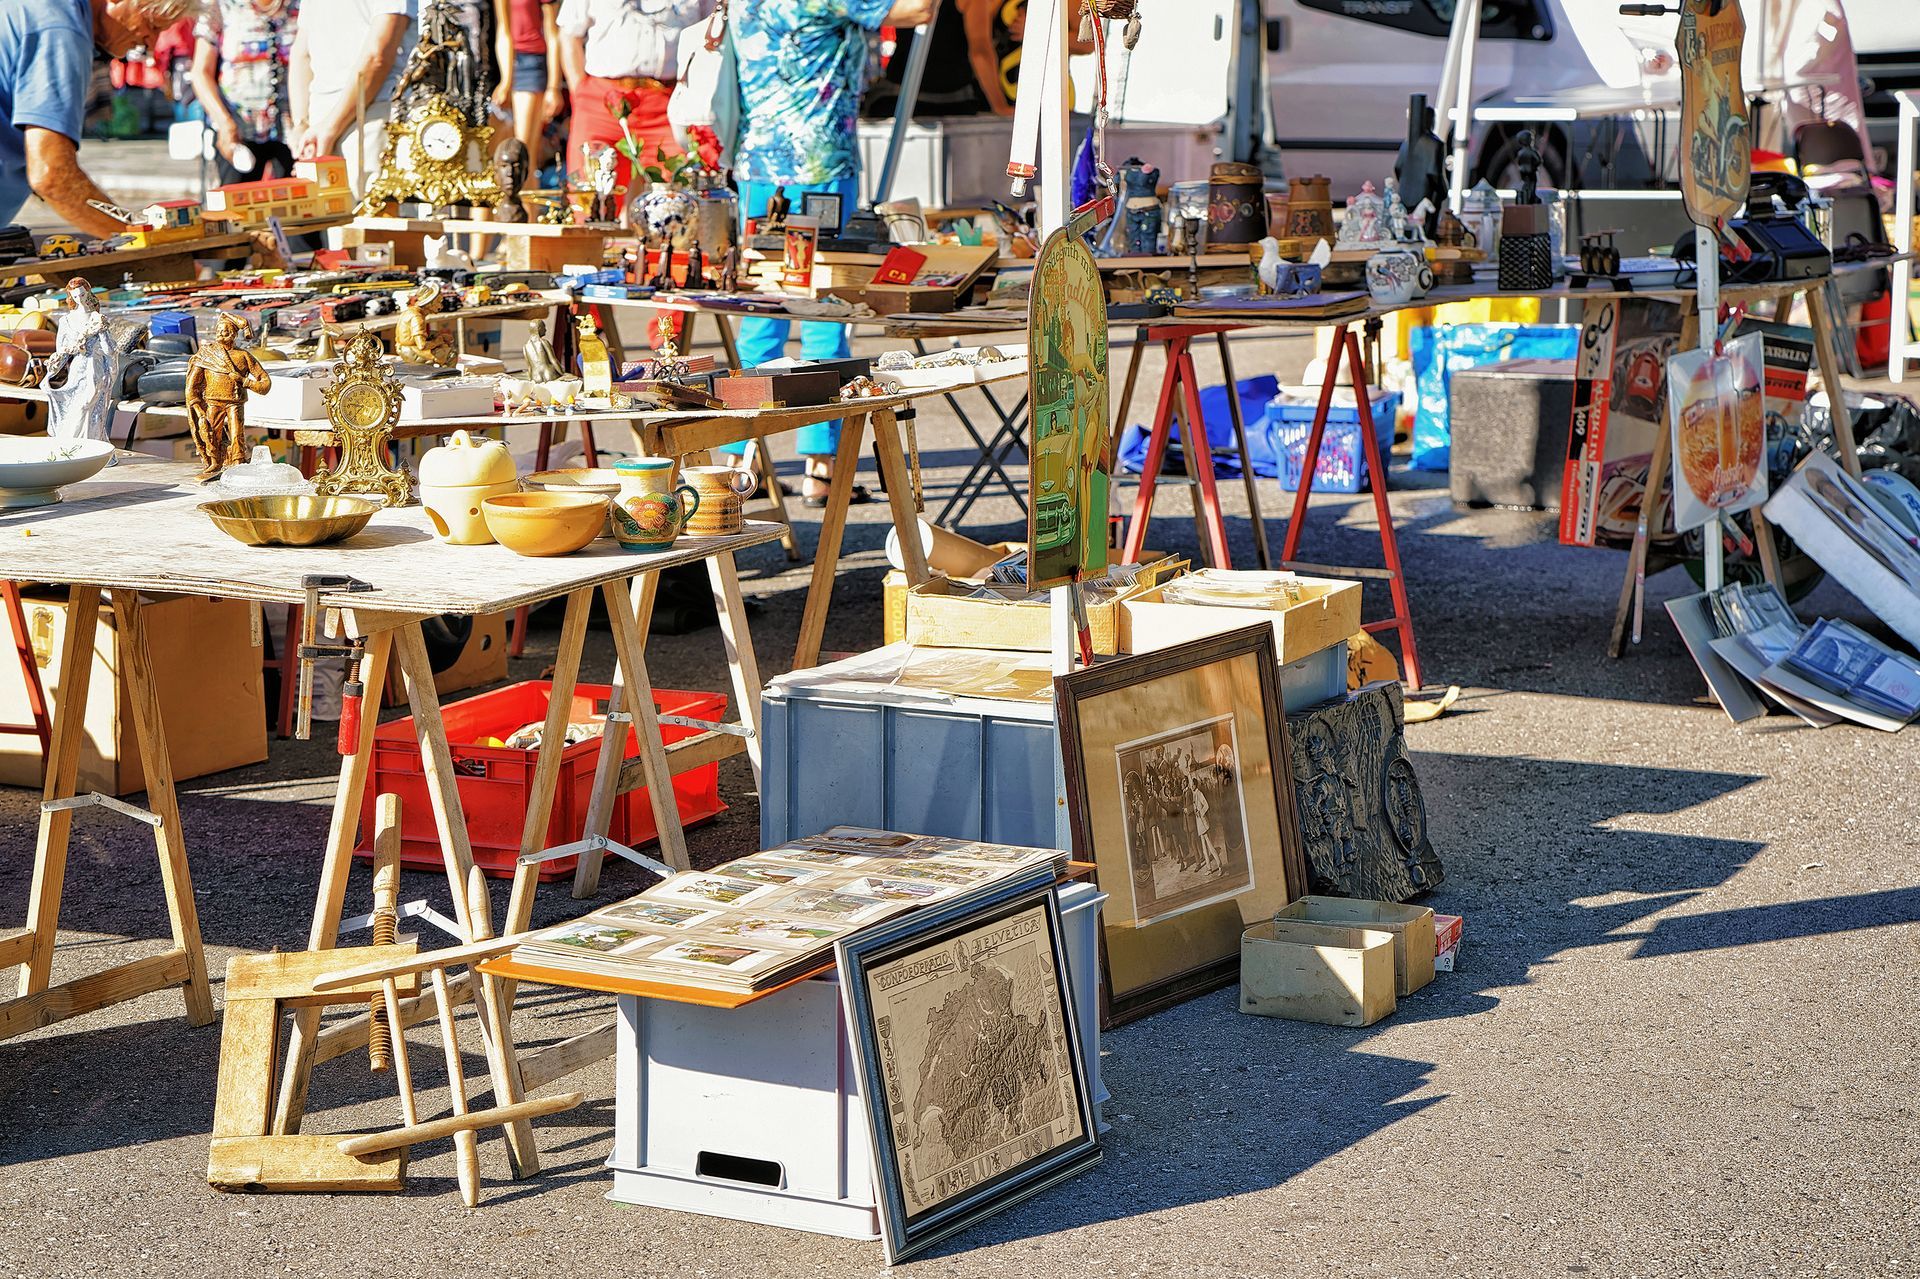 A flea market with lots of tables and boxes on the ground.